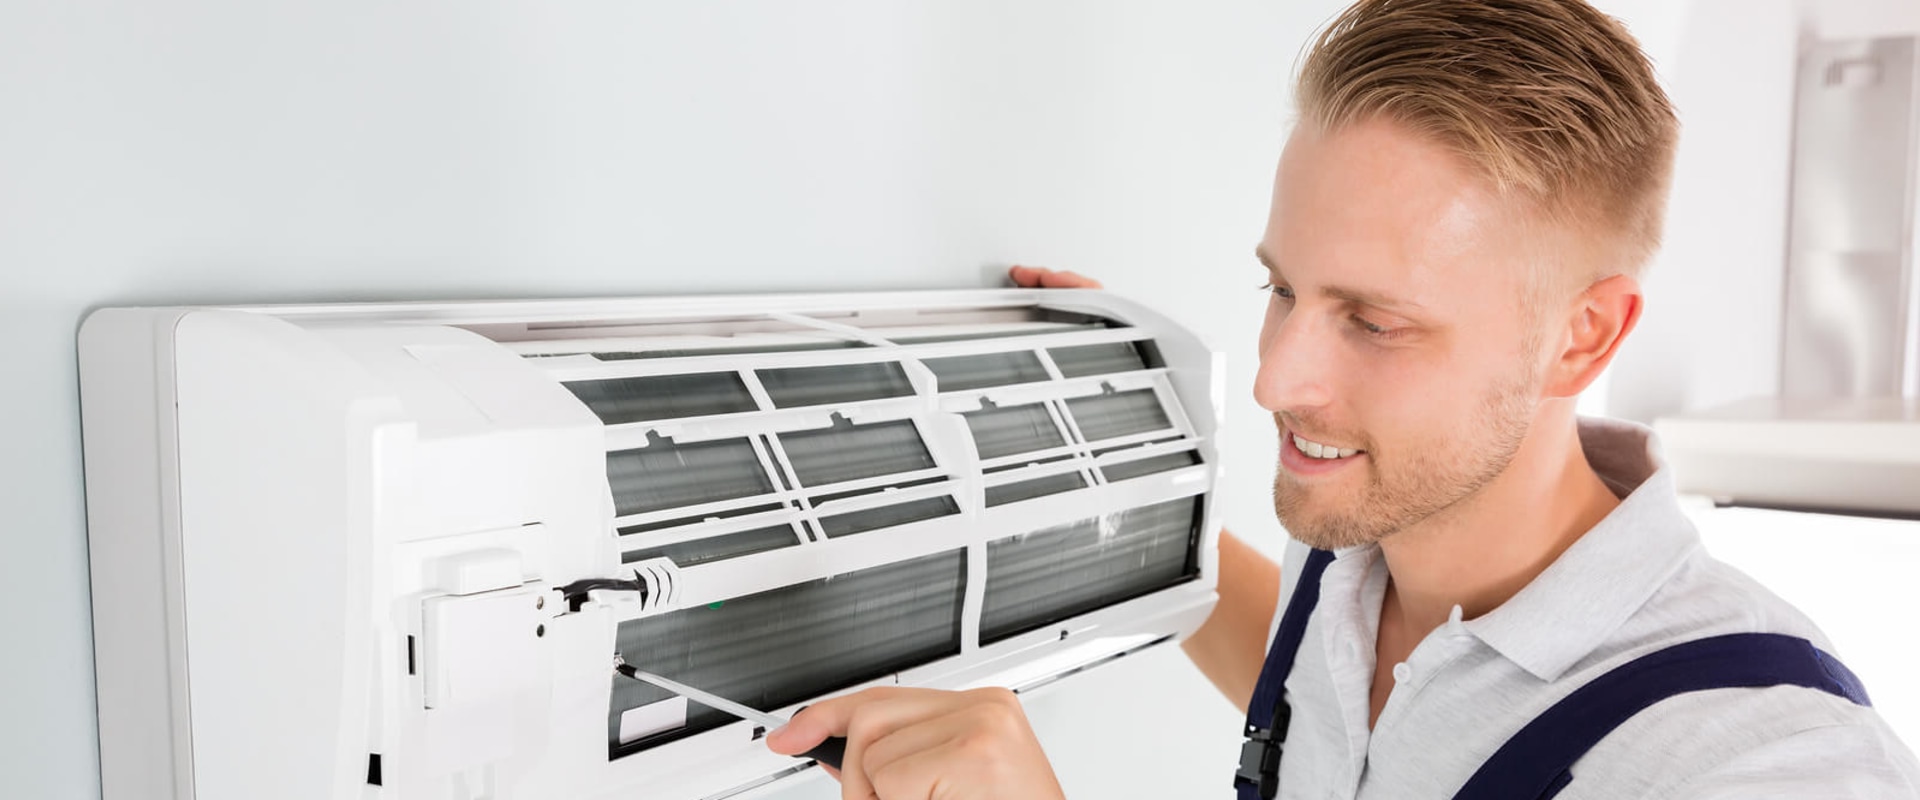 What does the air conditioning service include?